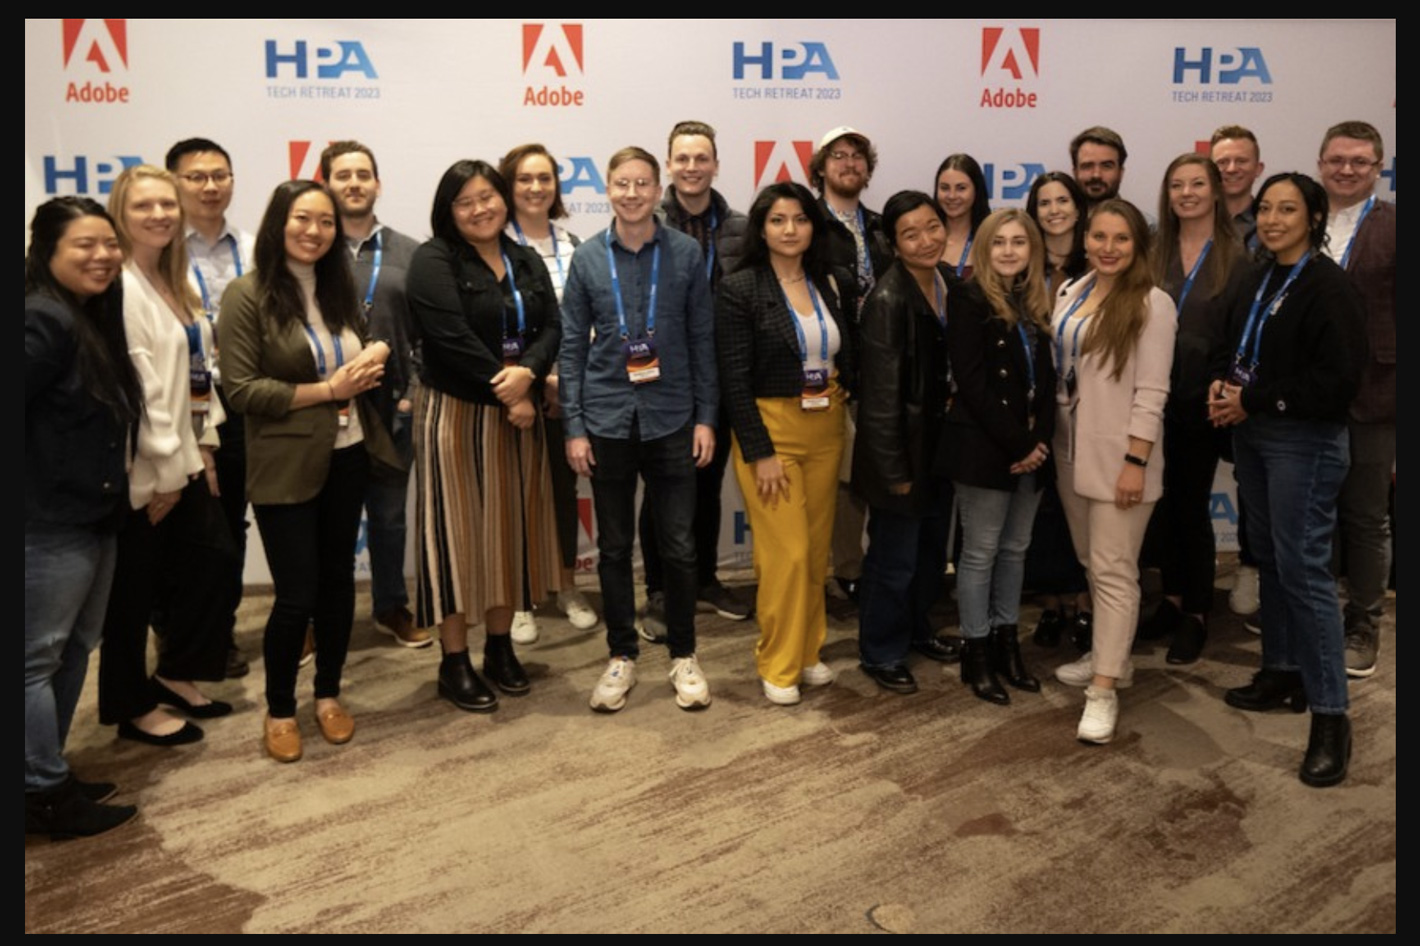 HPA announces the Young Entertainment Professionals class of 2023